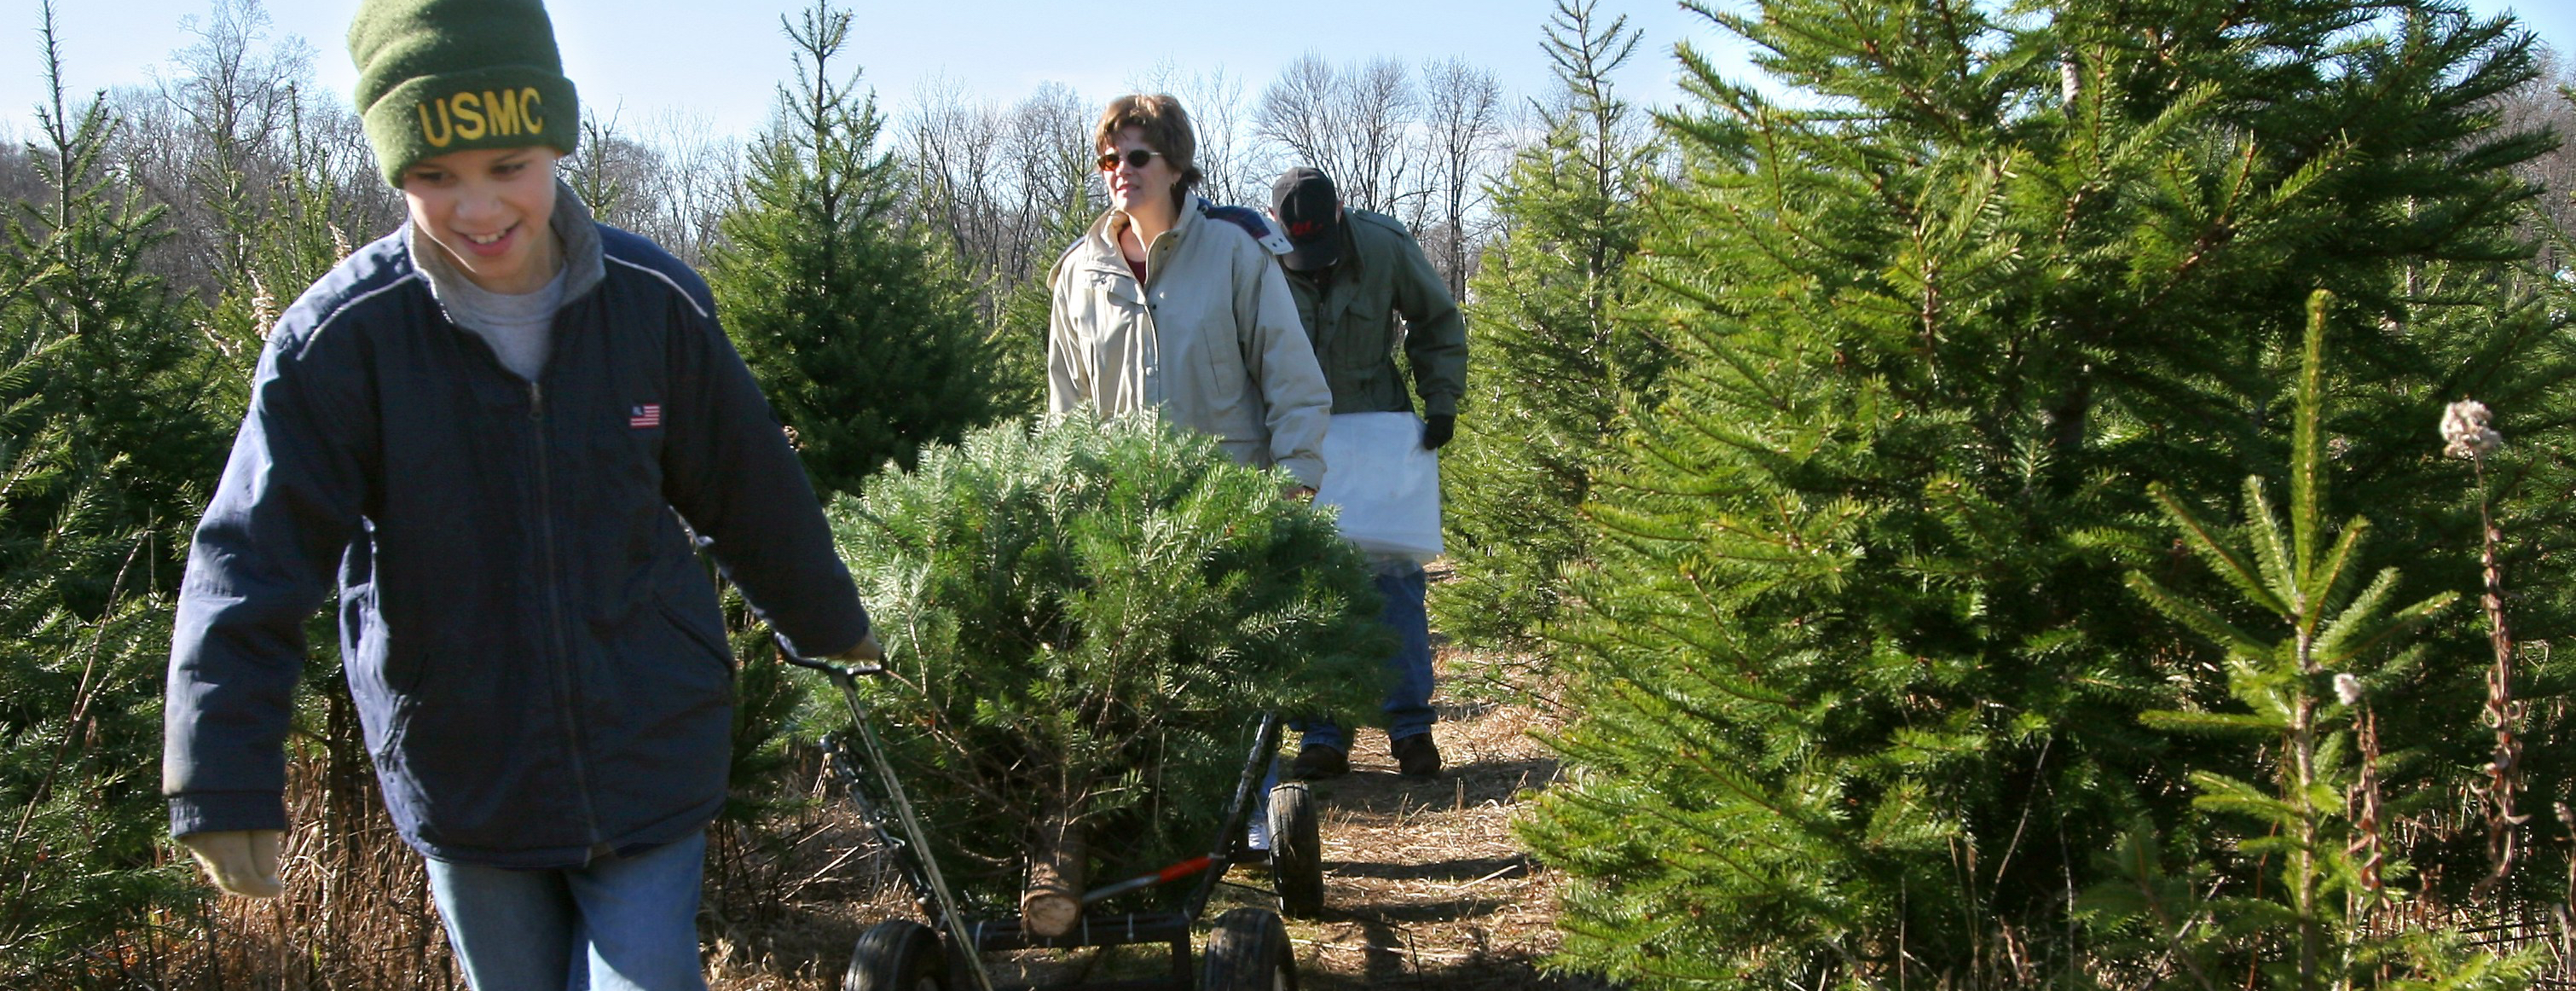 Spruce Goose Christmas Tree Farm – Cut Your Own New Jersey Fresh Christmas Tree